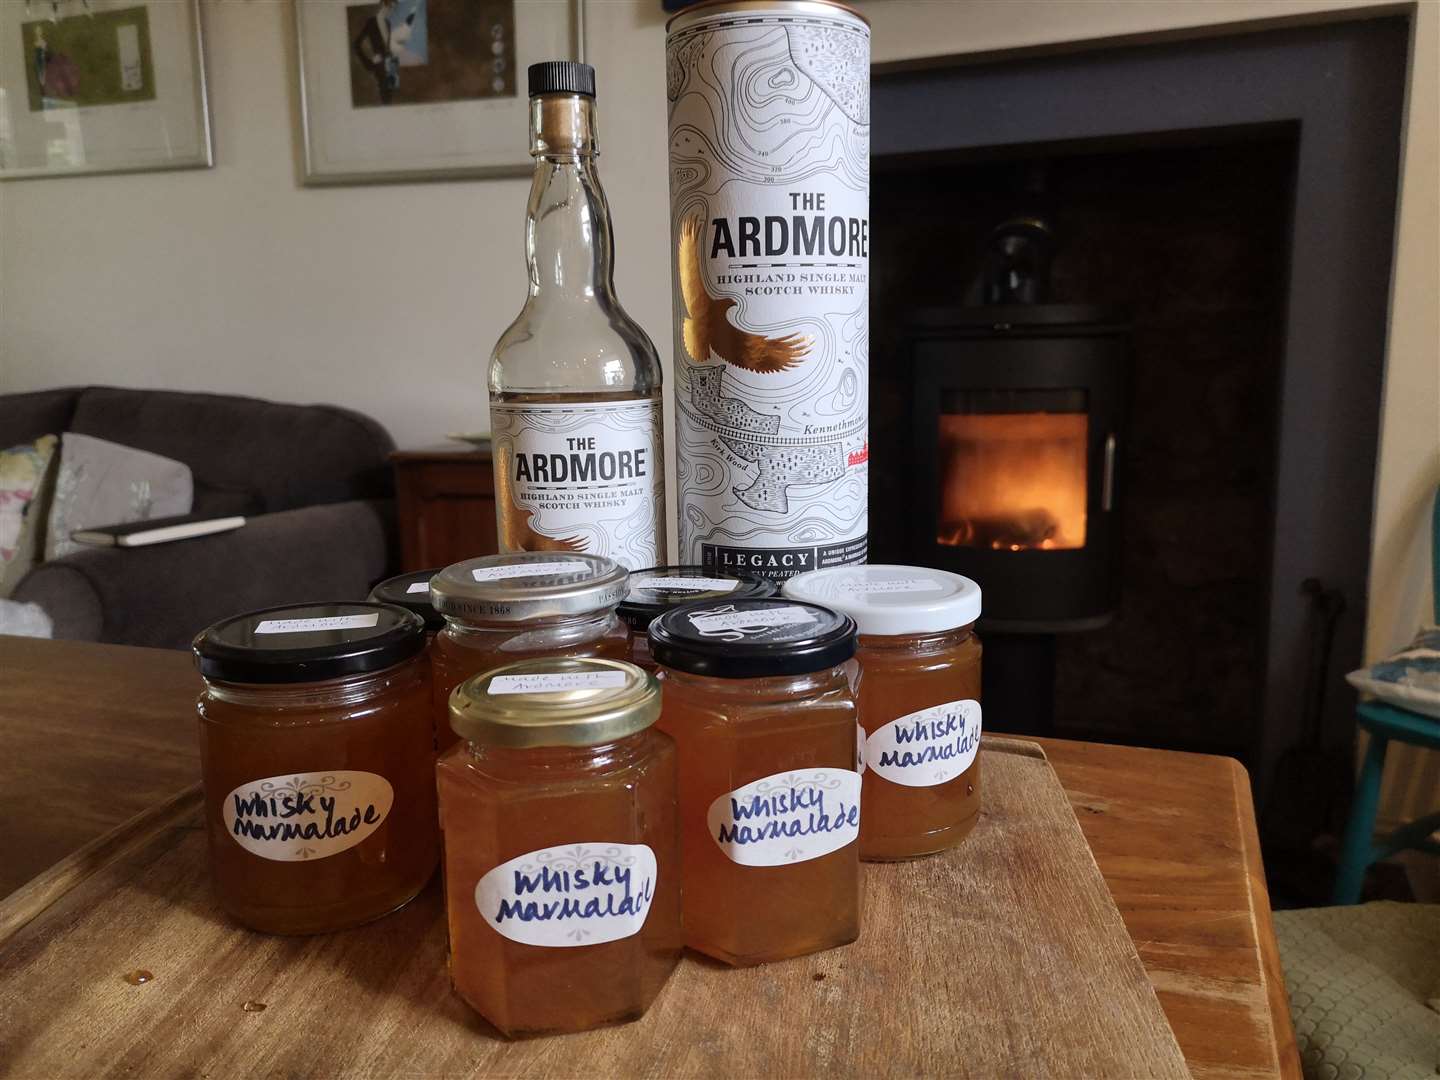 She has also produced whisky marmalade created with locally sourced whisky.